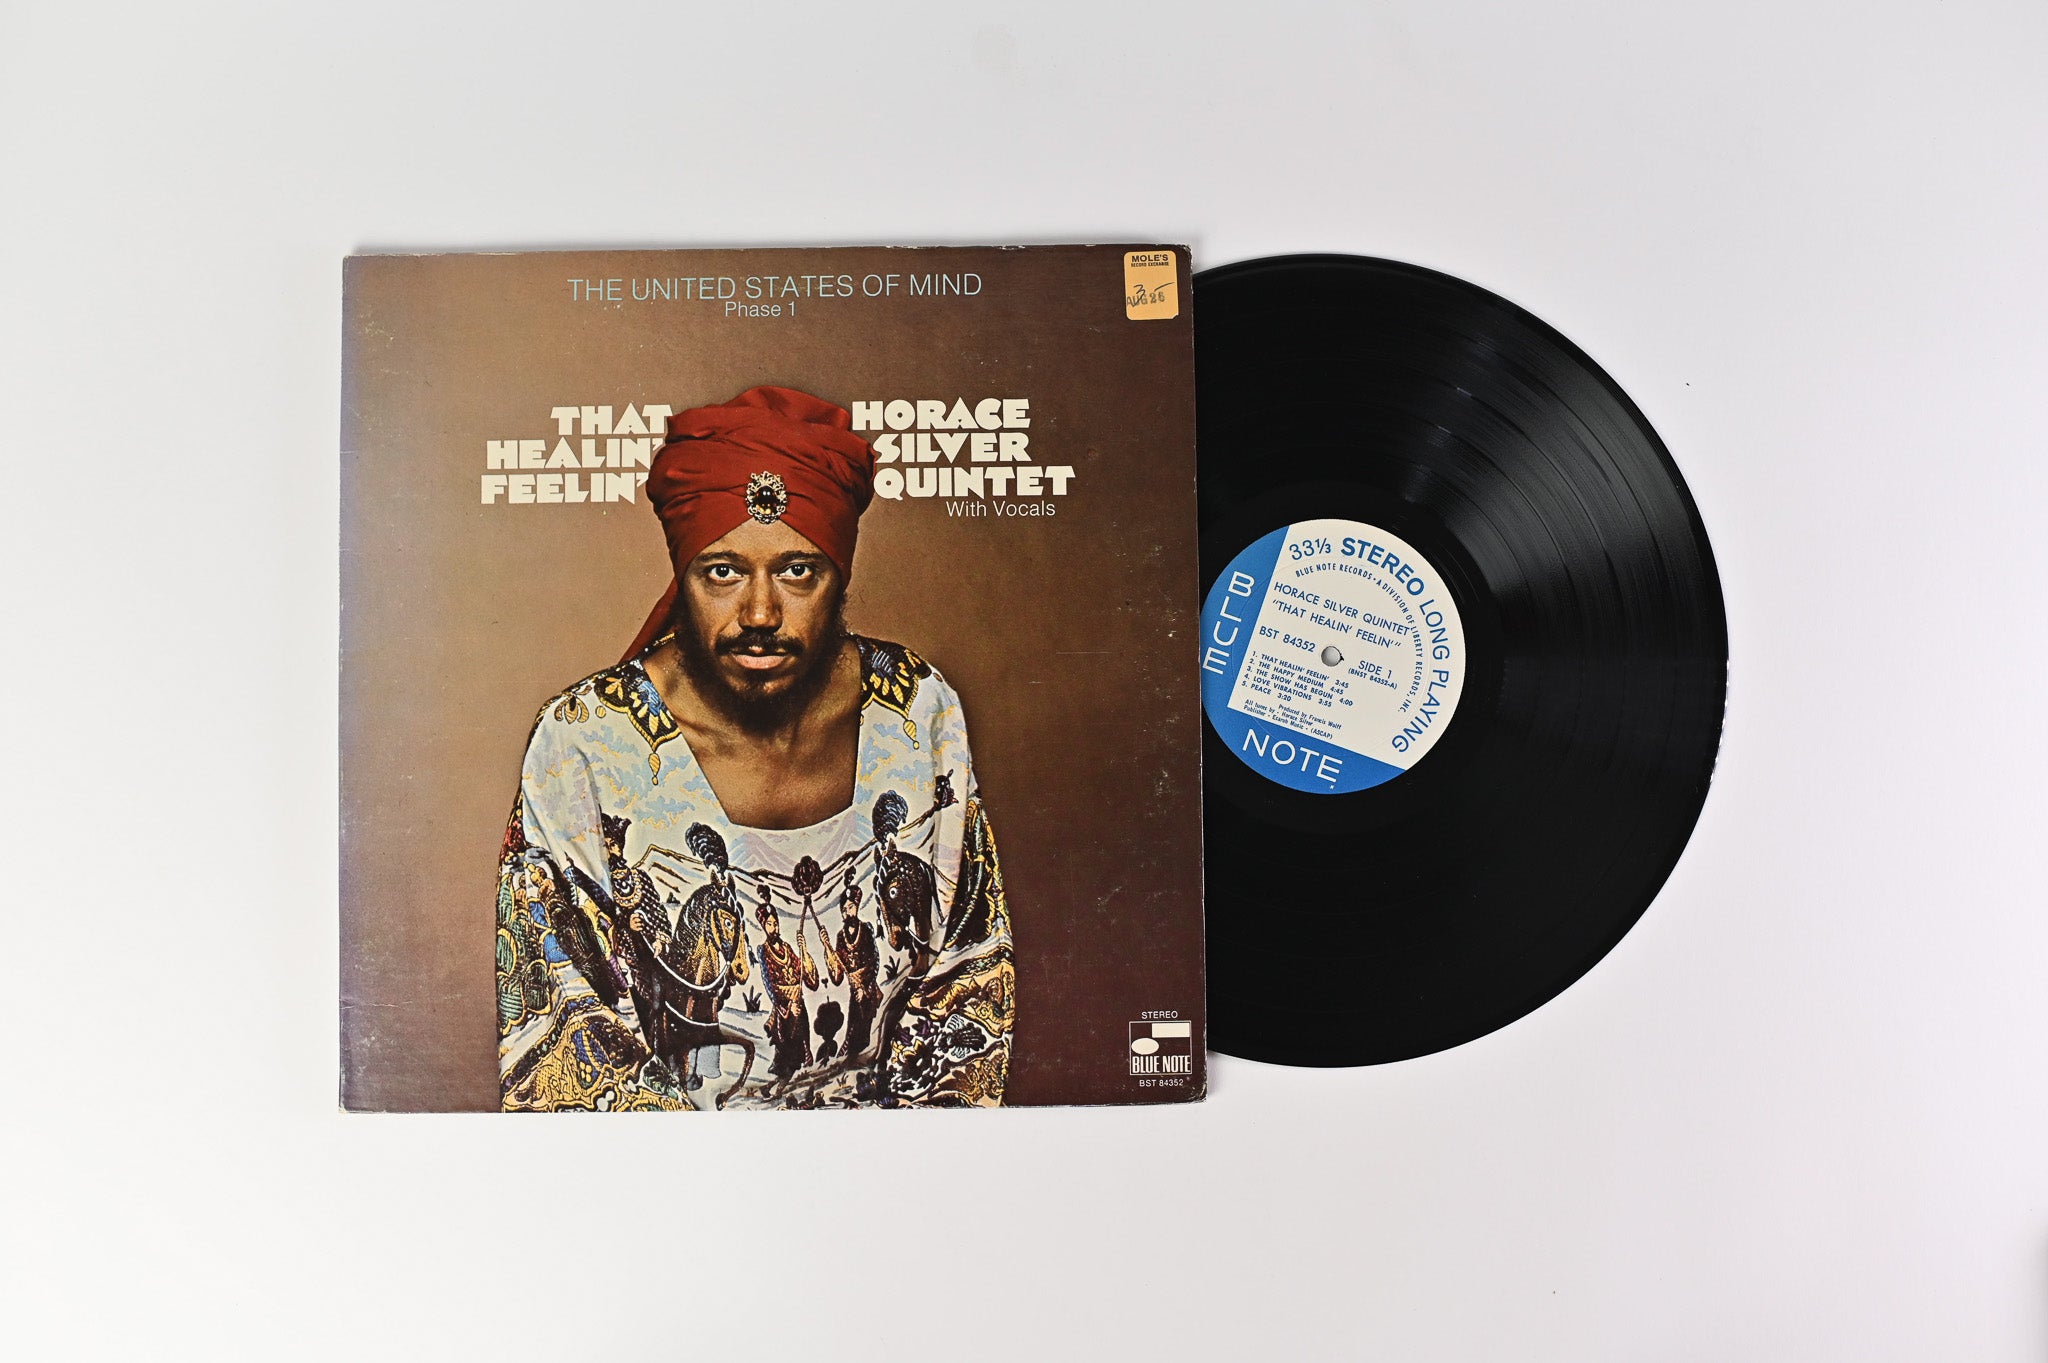 The Horace Silver Quintet - That Healin' Feelin' (The United States Of Mind / Phase 1) on Blue Note